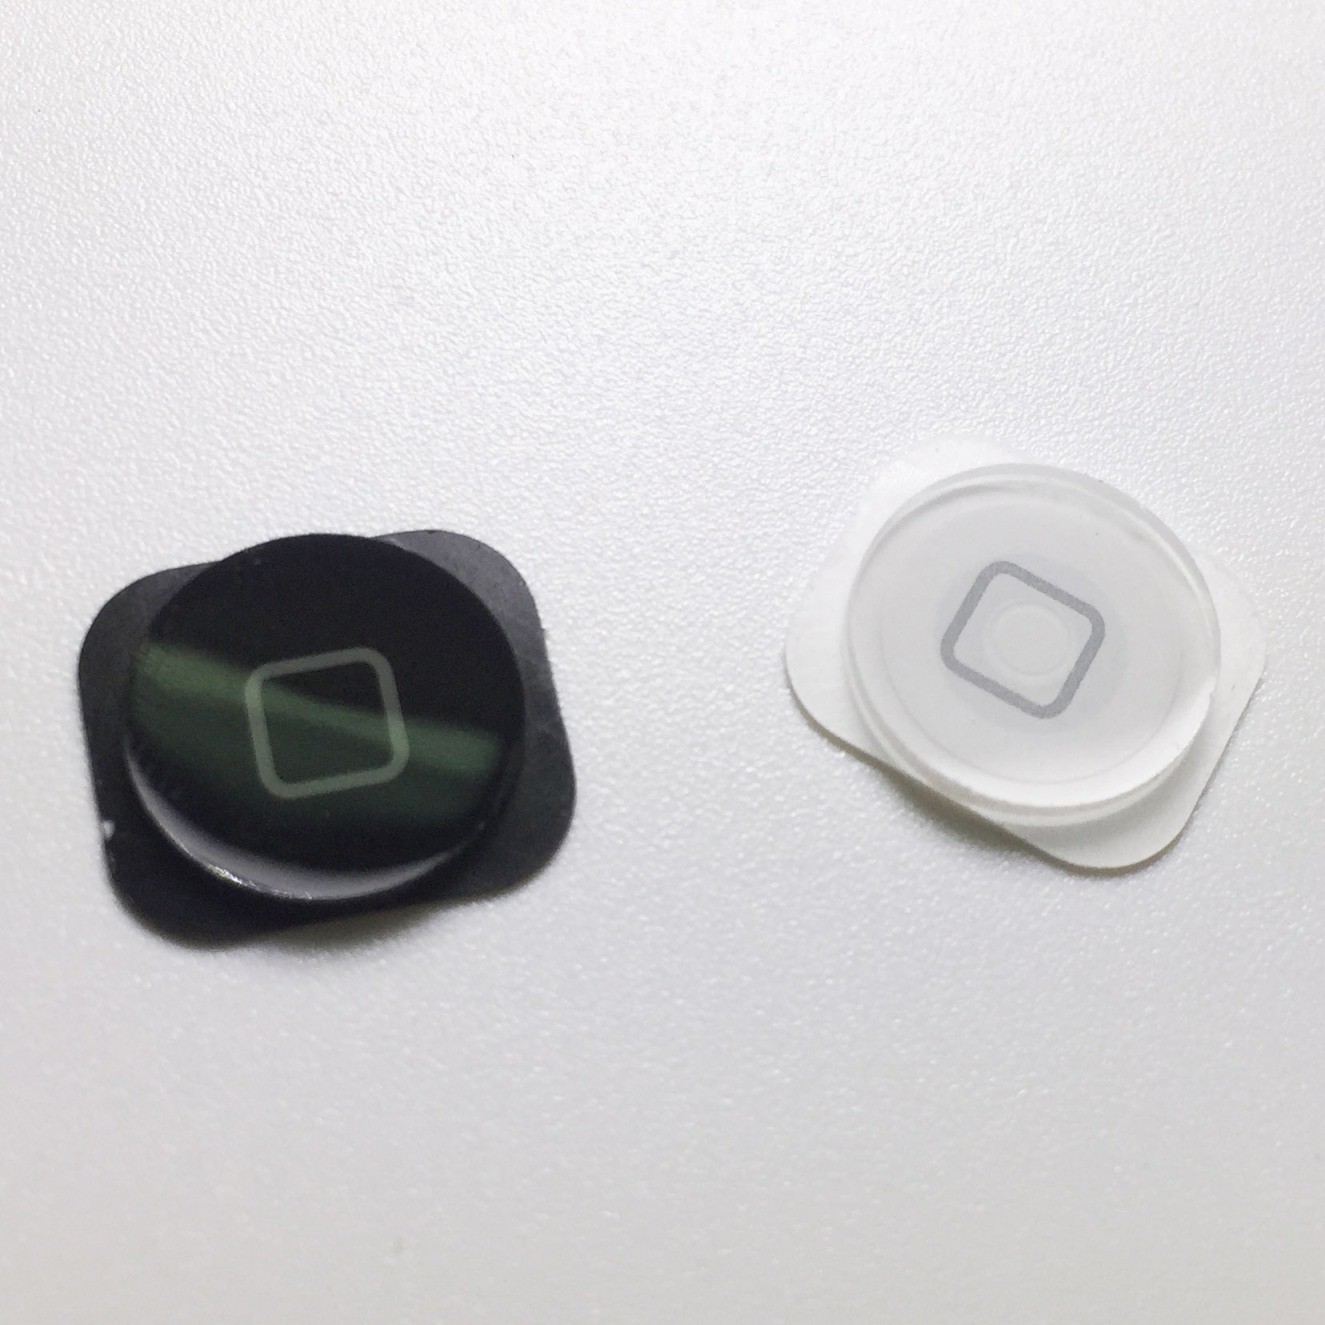 Mobile Home Button for iPhone5C and 5g